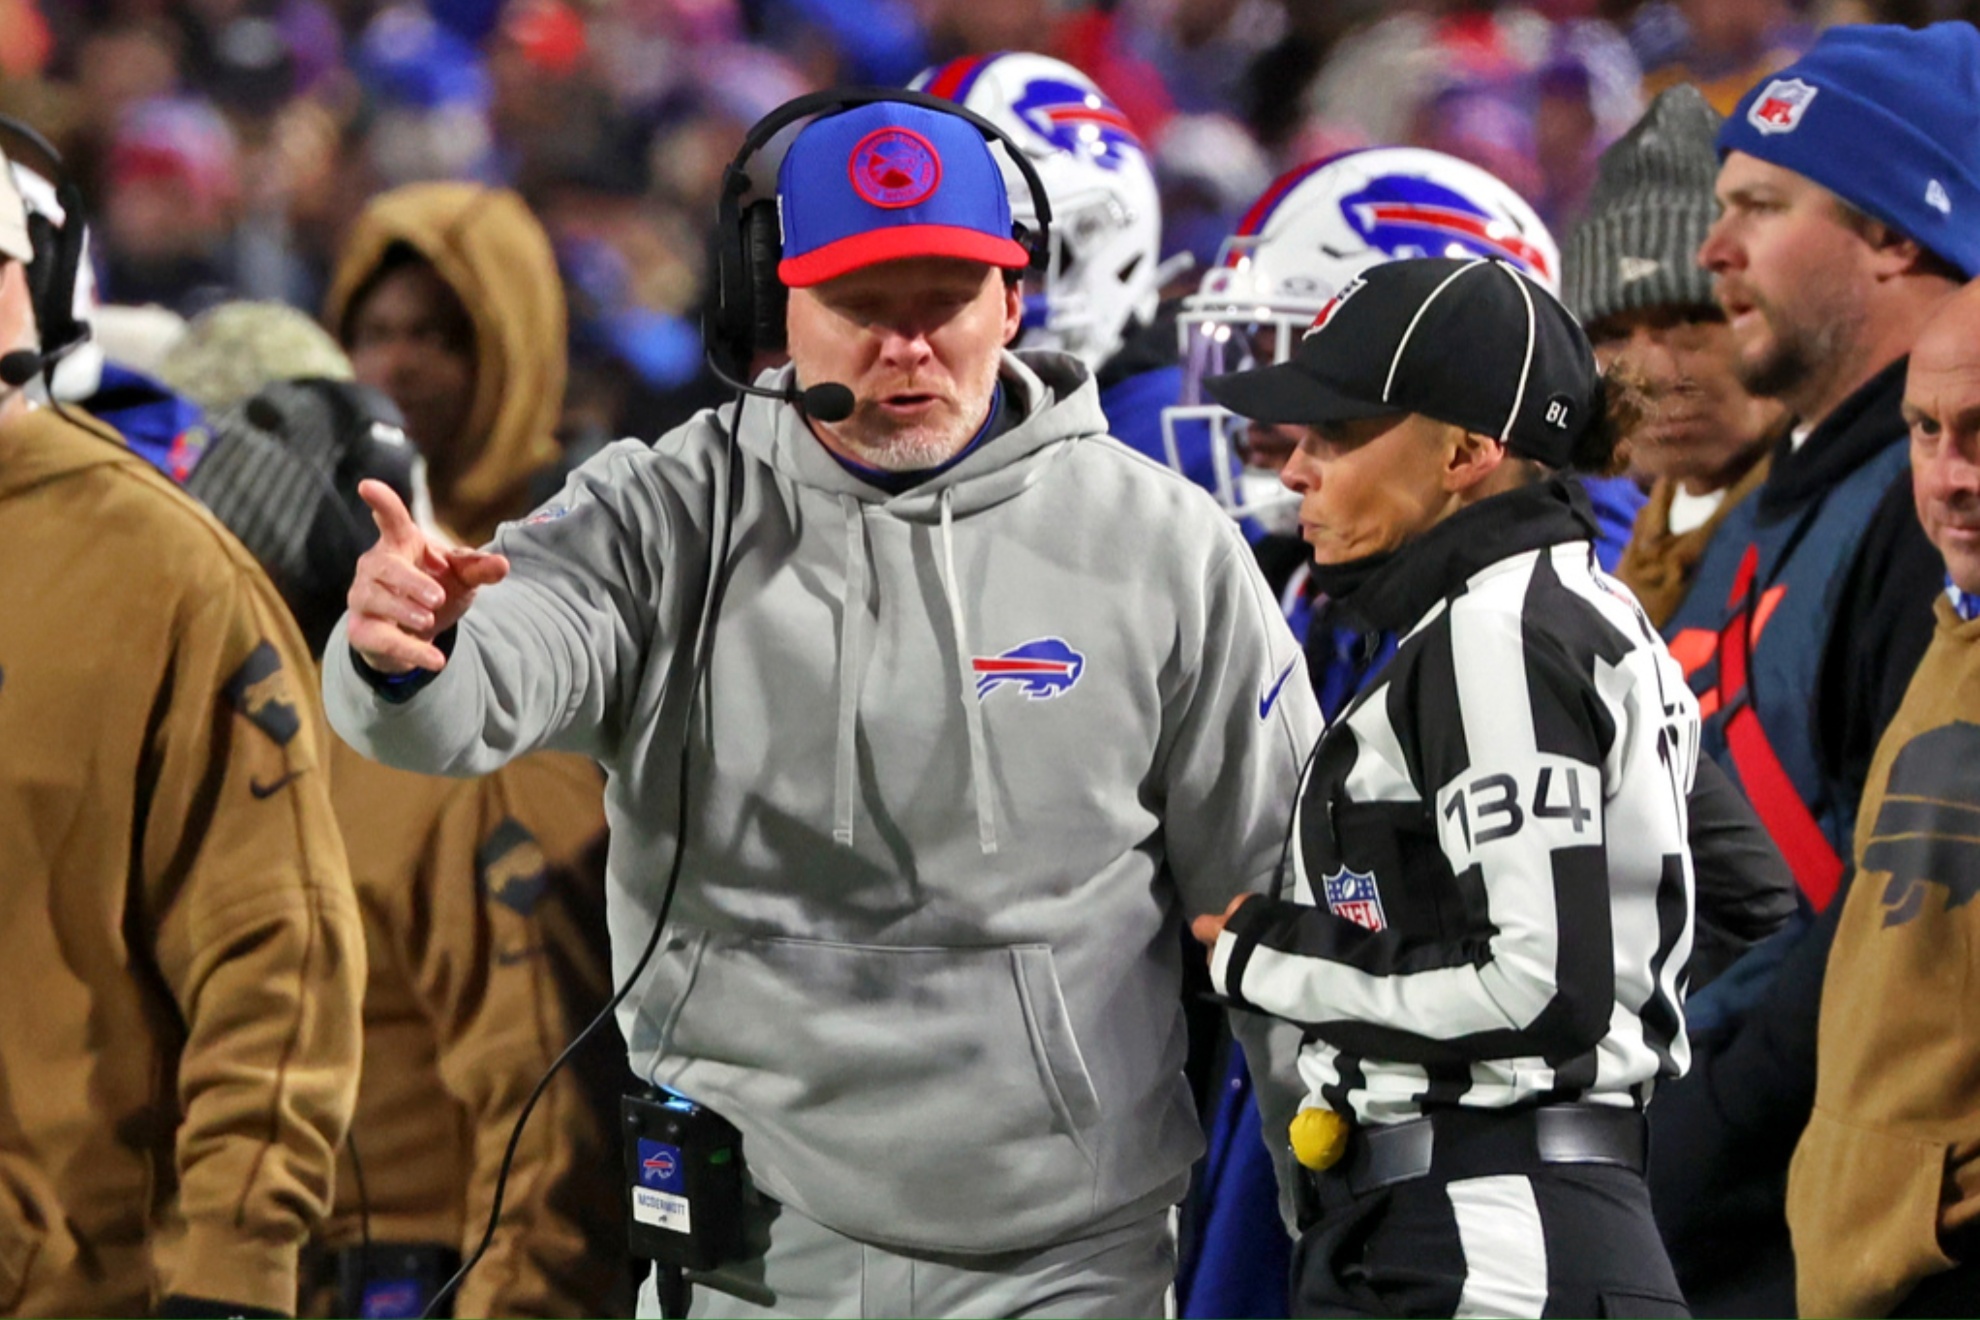 The Bills had some controversial referee calls go agains them against the Eagles